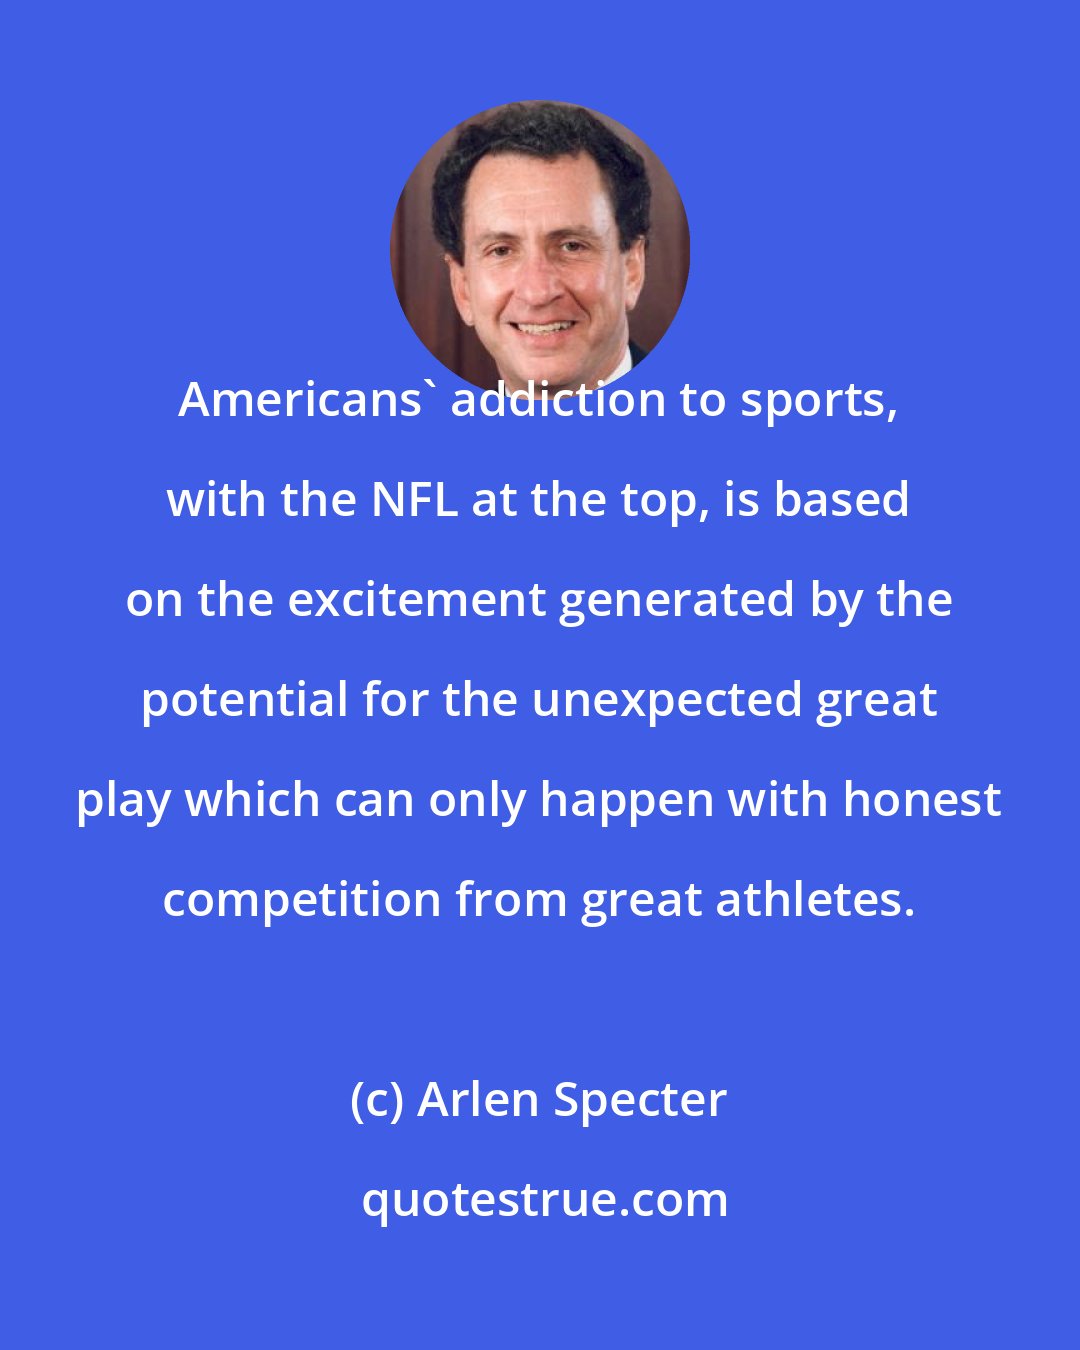 Arlen Specter: Americans' addiction to sports, with the NFL at the top, is based on the excitement generated by the potential for the unexpected great play which can only happen with honest competition from great athletes.